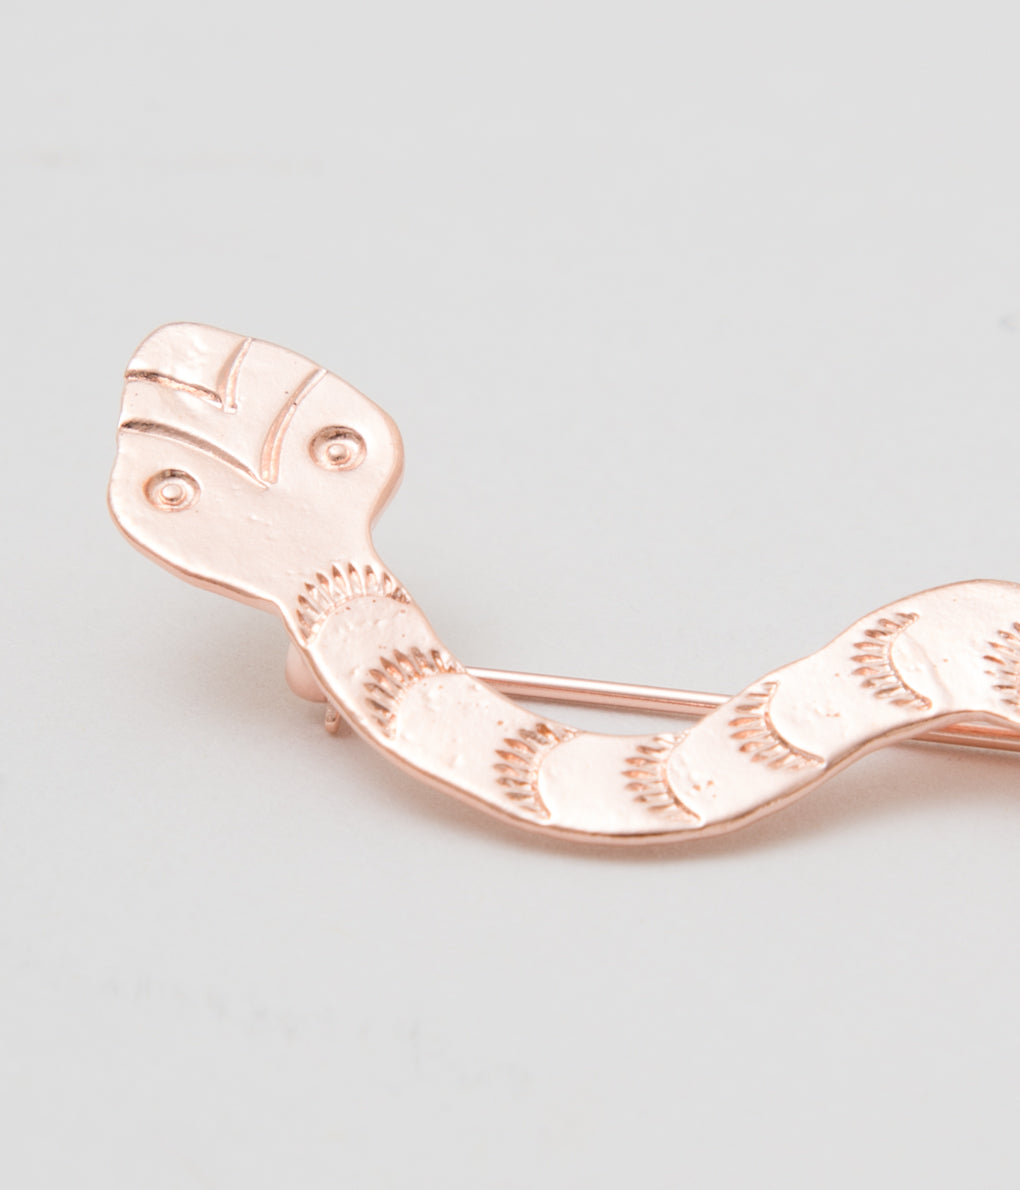 WESTOVERALLS "NW×WOA SNAKE BROOCH"(COPPER)